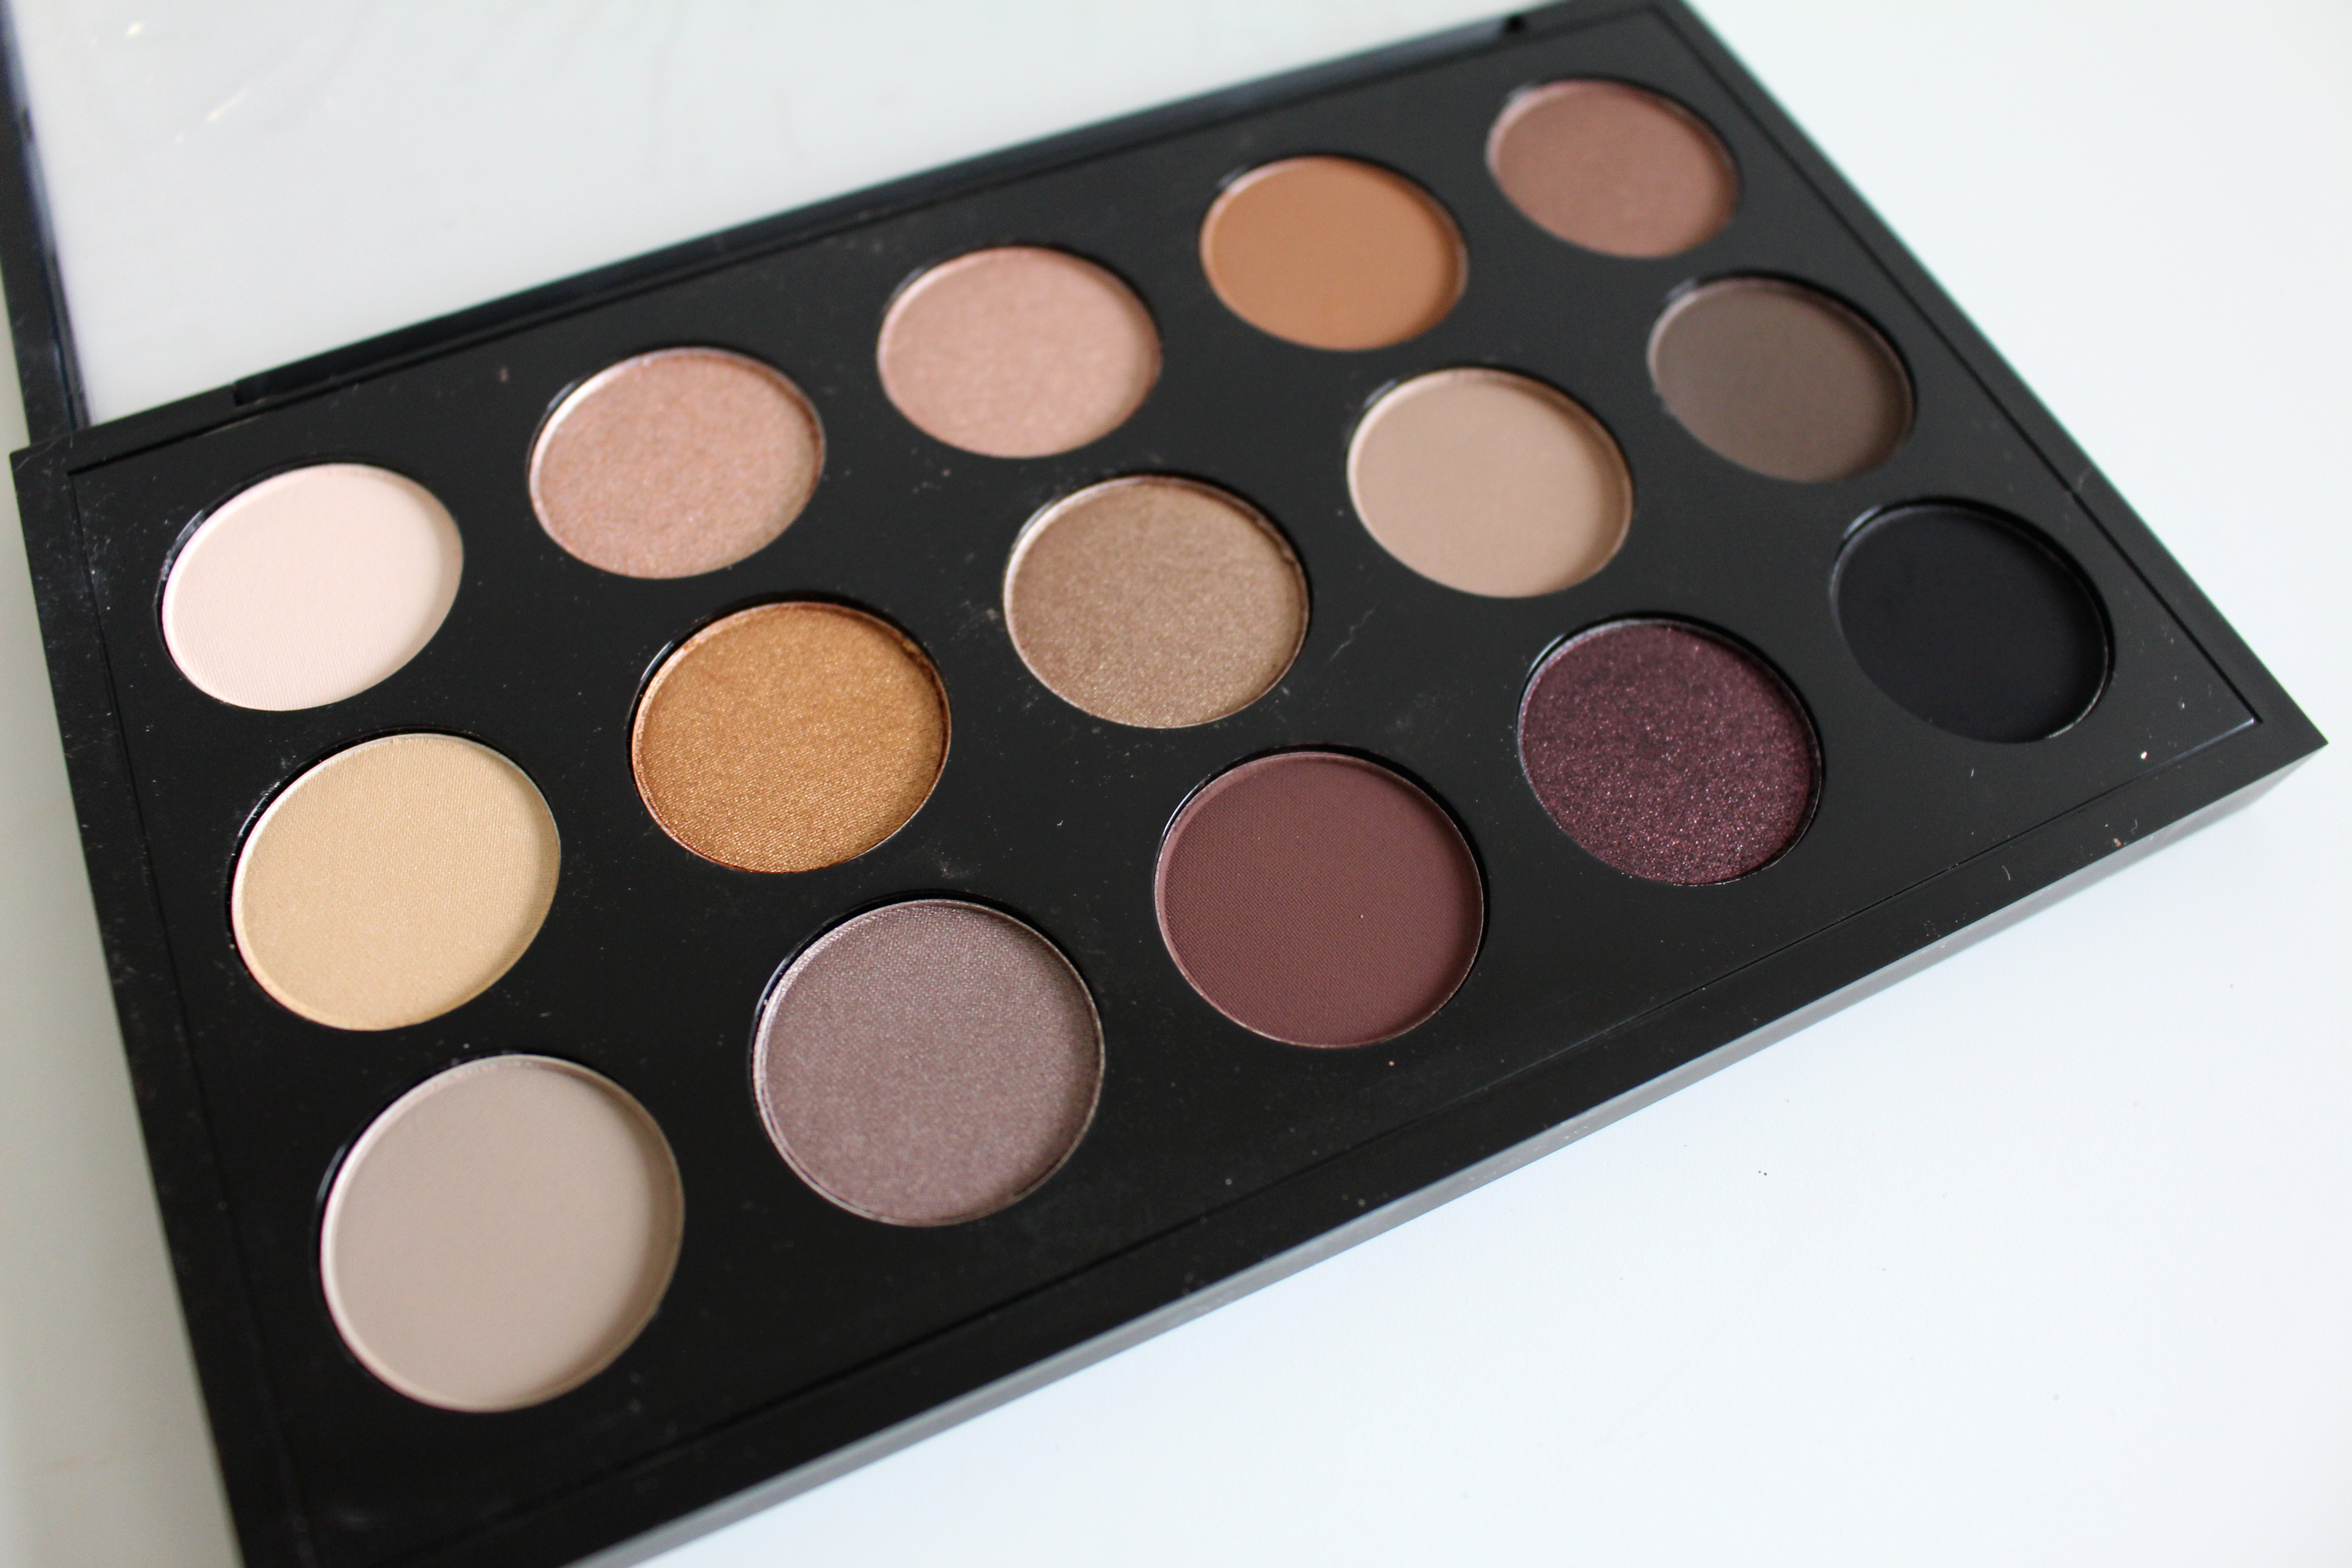 mac and came across this mac nordstrom naturals eyeshadow palette